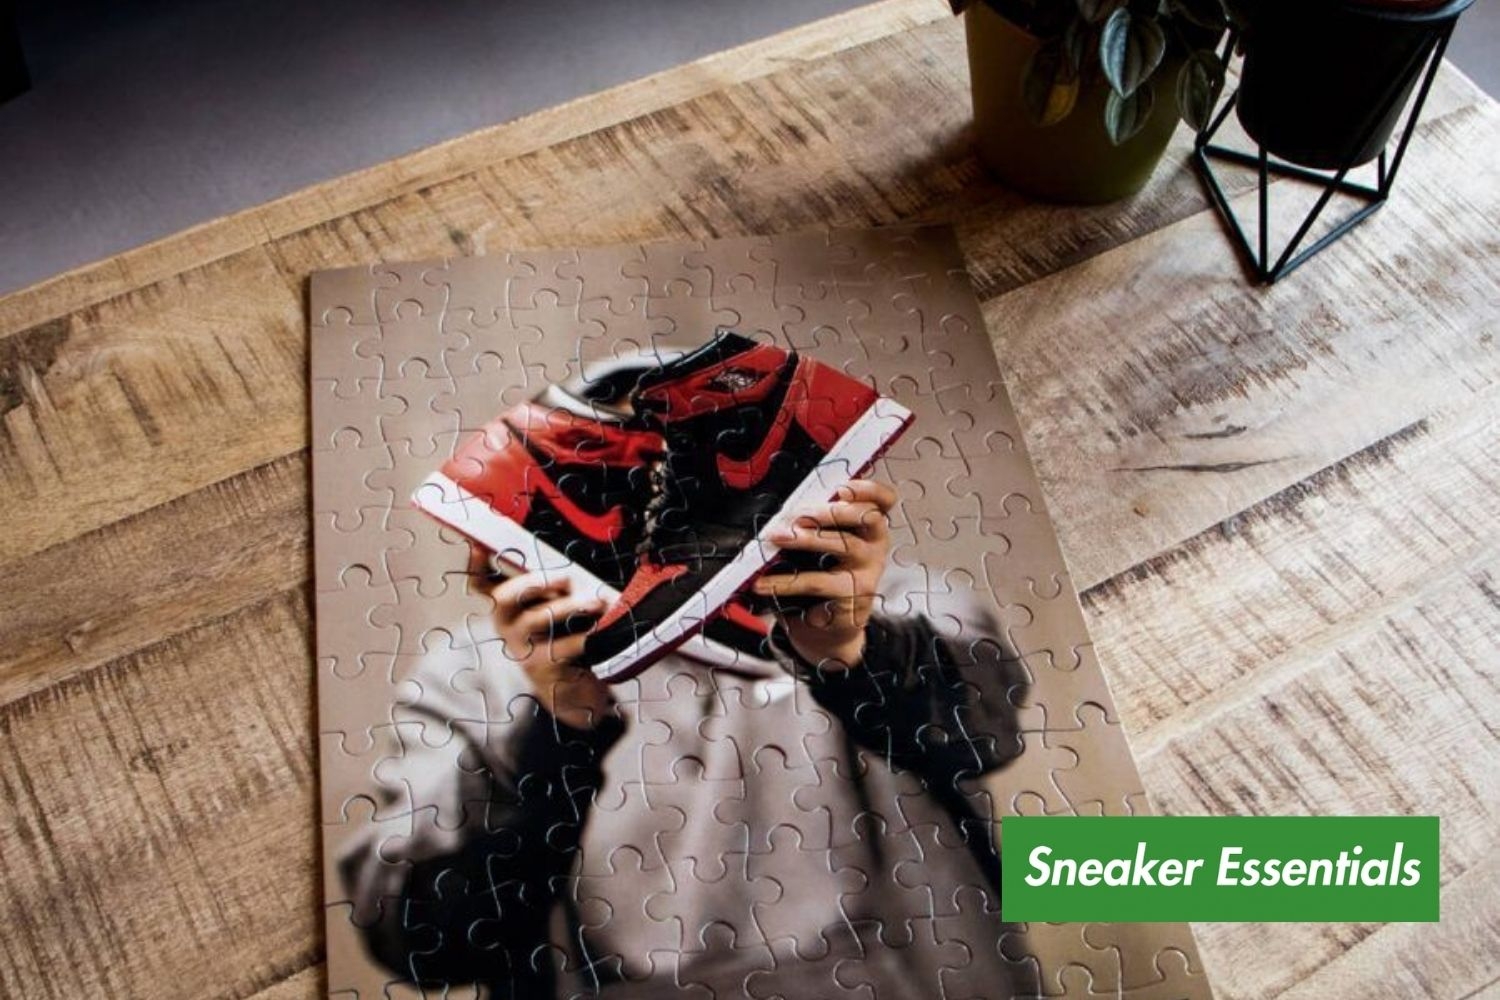 Shop the coolest items at Sneaker Essentials